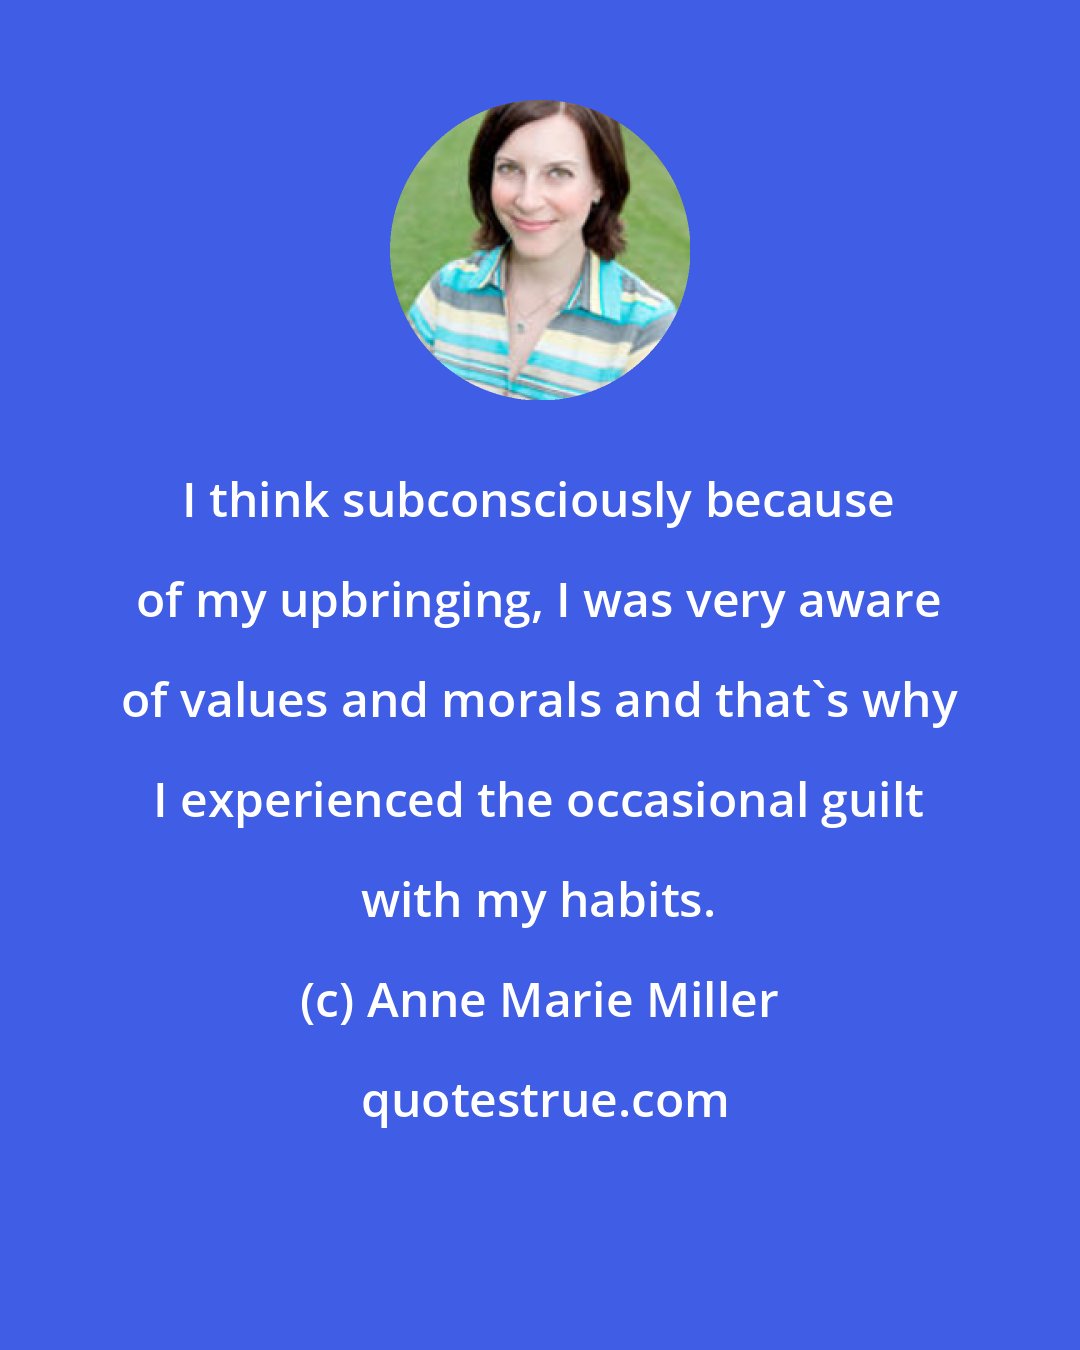 Anne Marie Miller: I think subconsciously because of my upbringing, I was very aware of values and morals and that's why I experienced the occasional guilt with my habits.